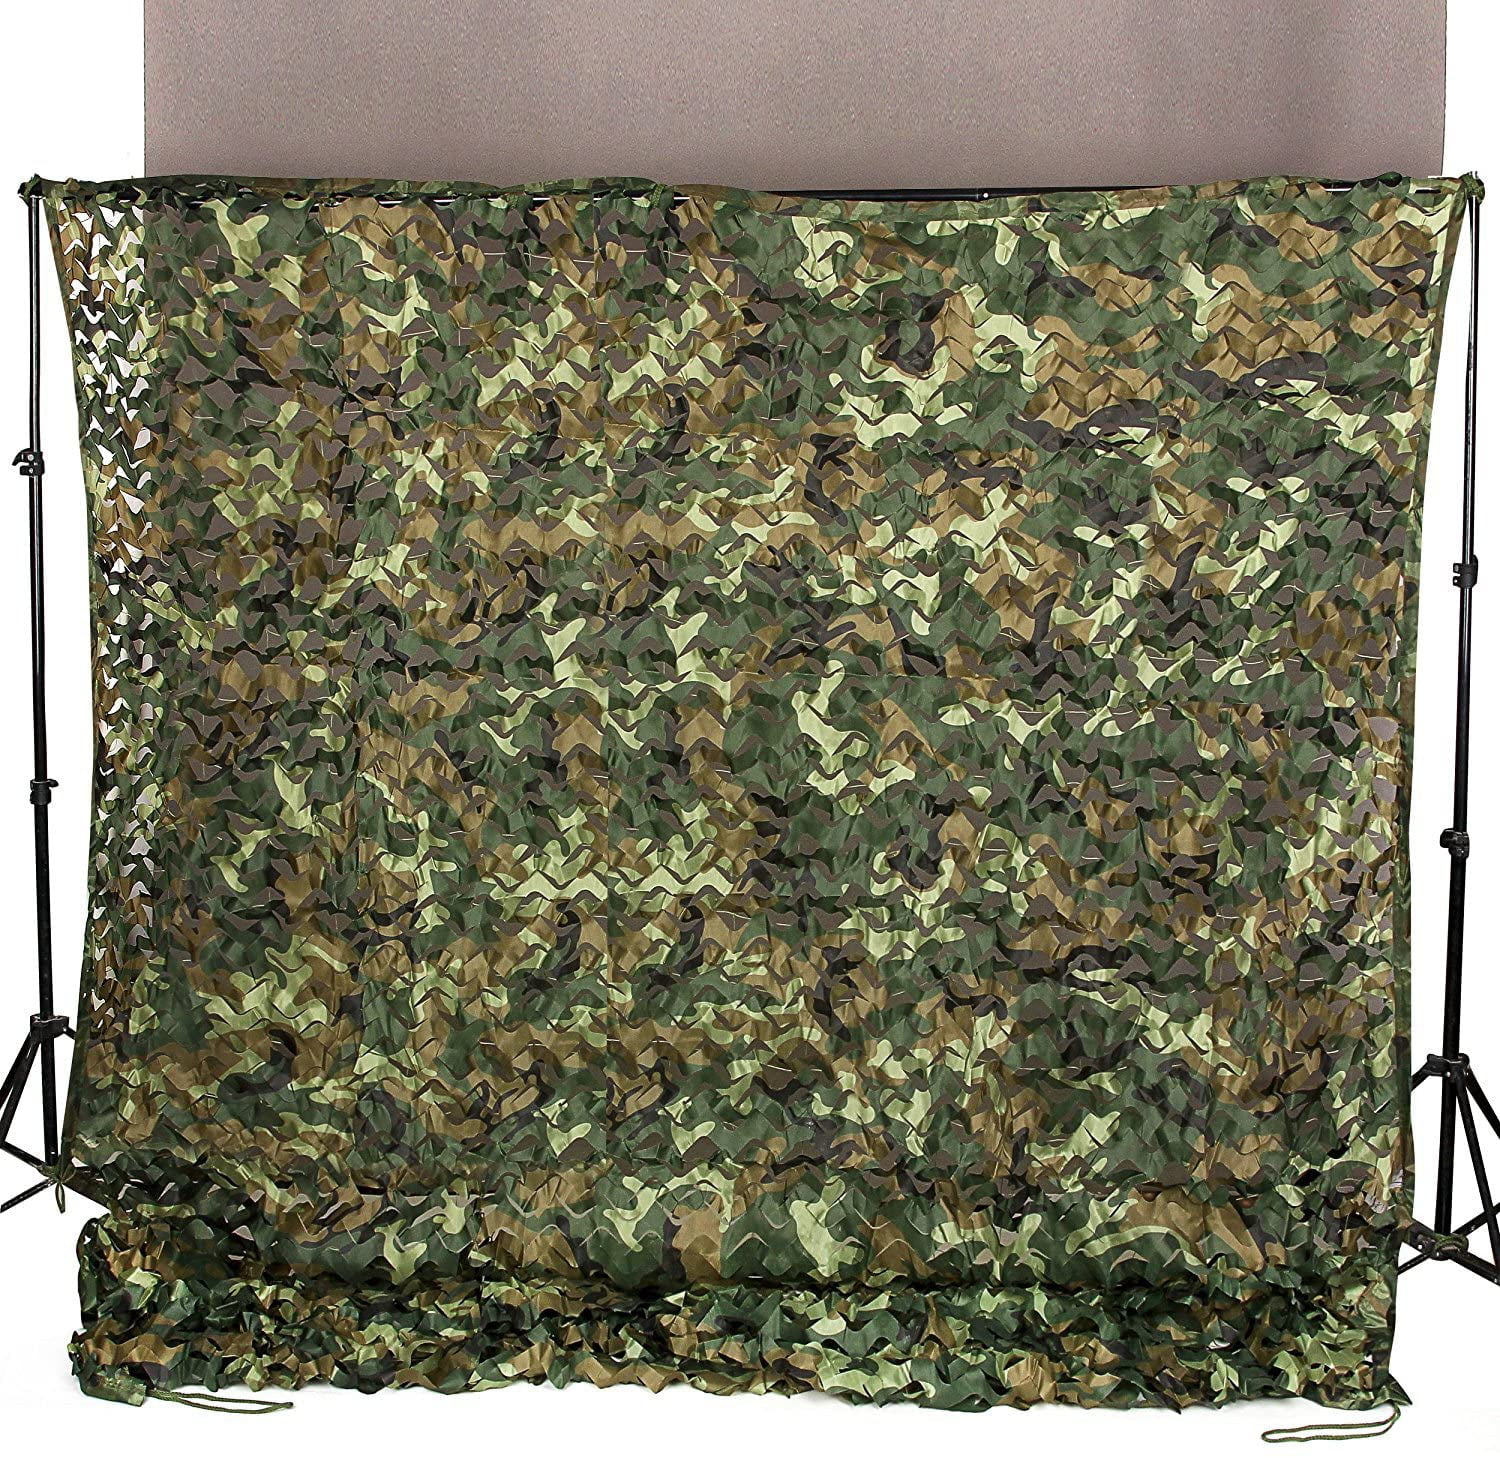 Camouflage Netting Camping Military Hunting Woodland Desert Army Sunshade Party 